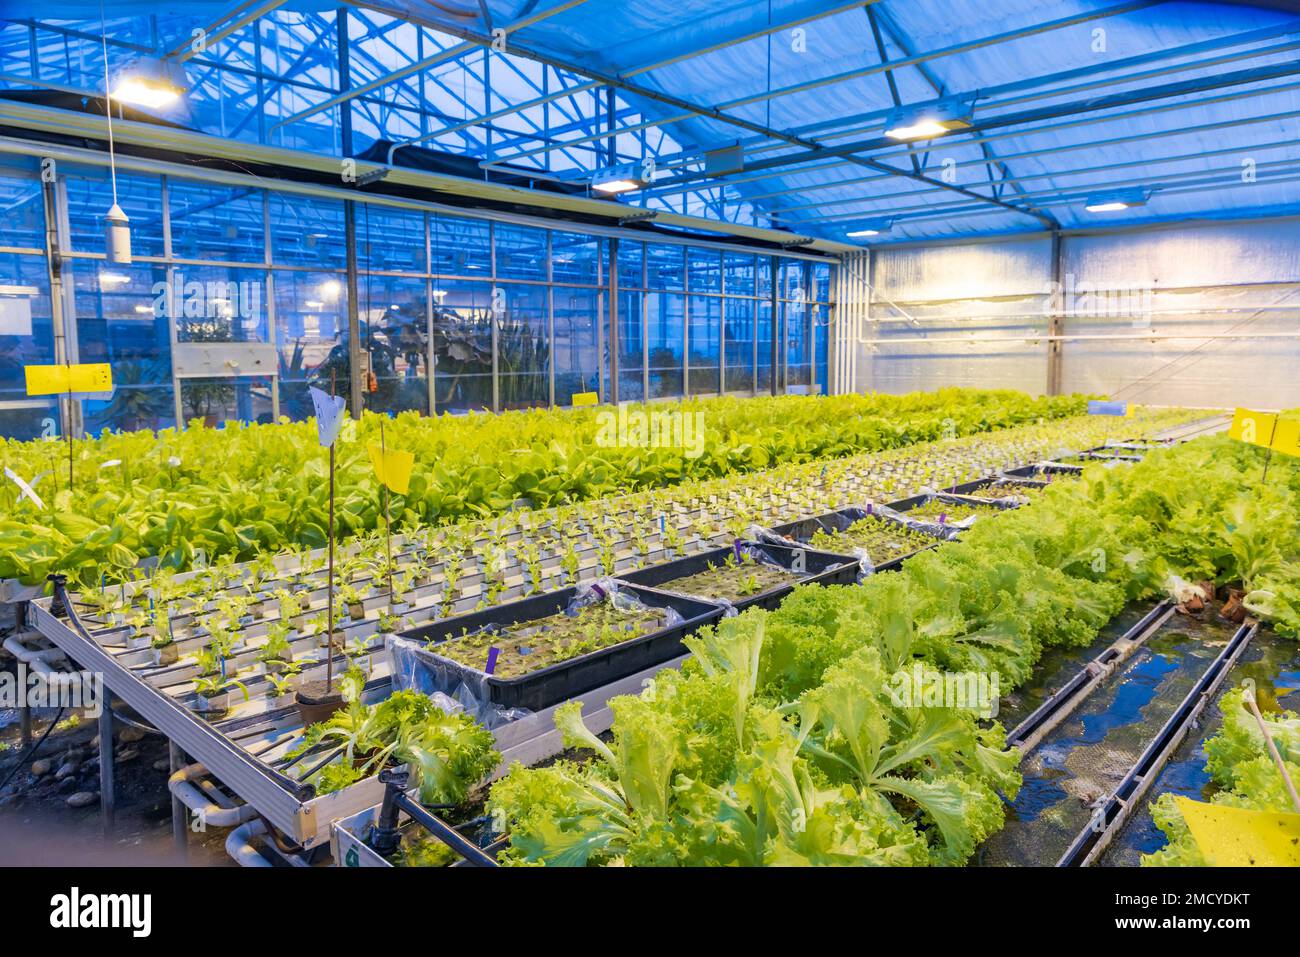 Glass house cultivating different kinds of lettuce with blue led light during the winter time which stimulates growth like natural light. Stock Photo